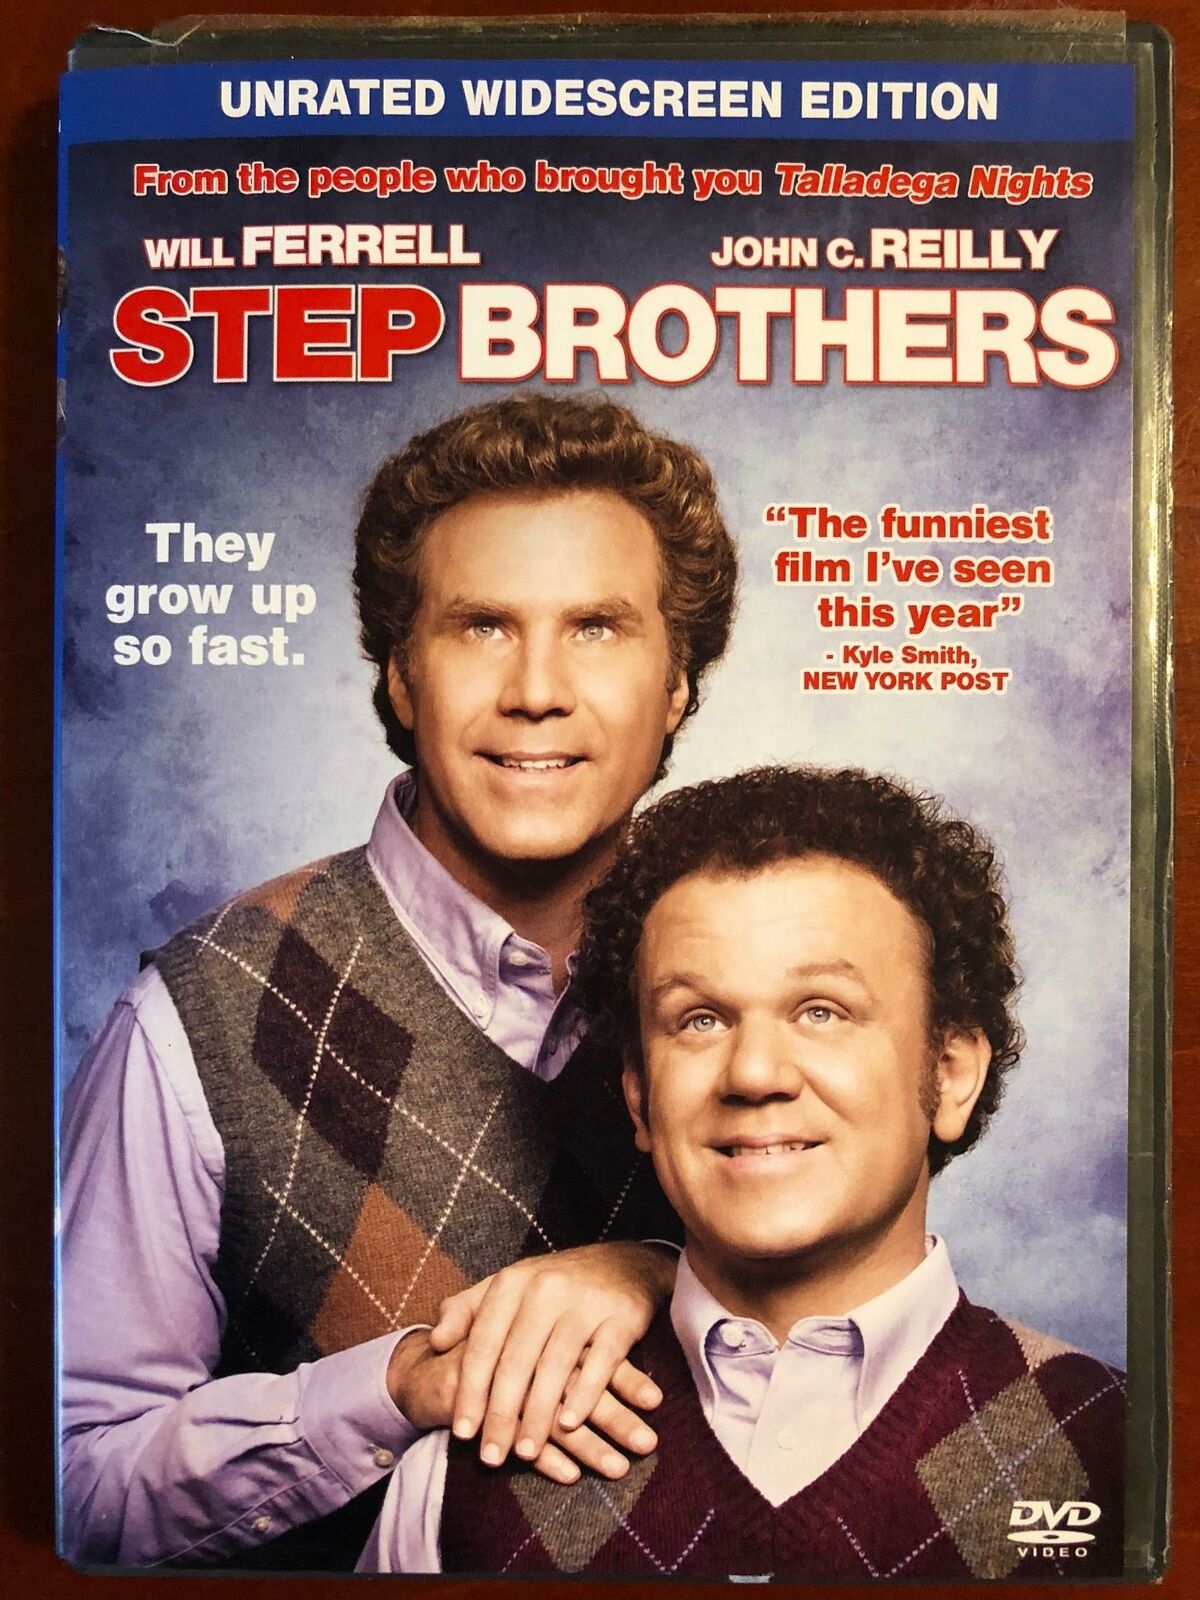 Step Brothers (DVD, 2008, Unrated Widescreen) - G0531